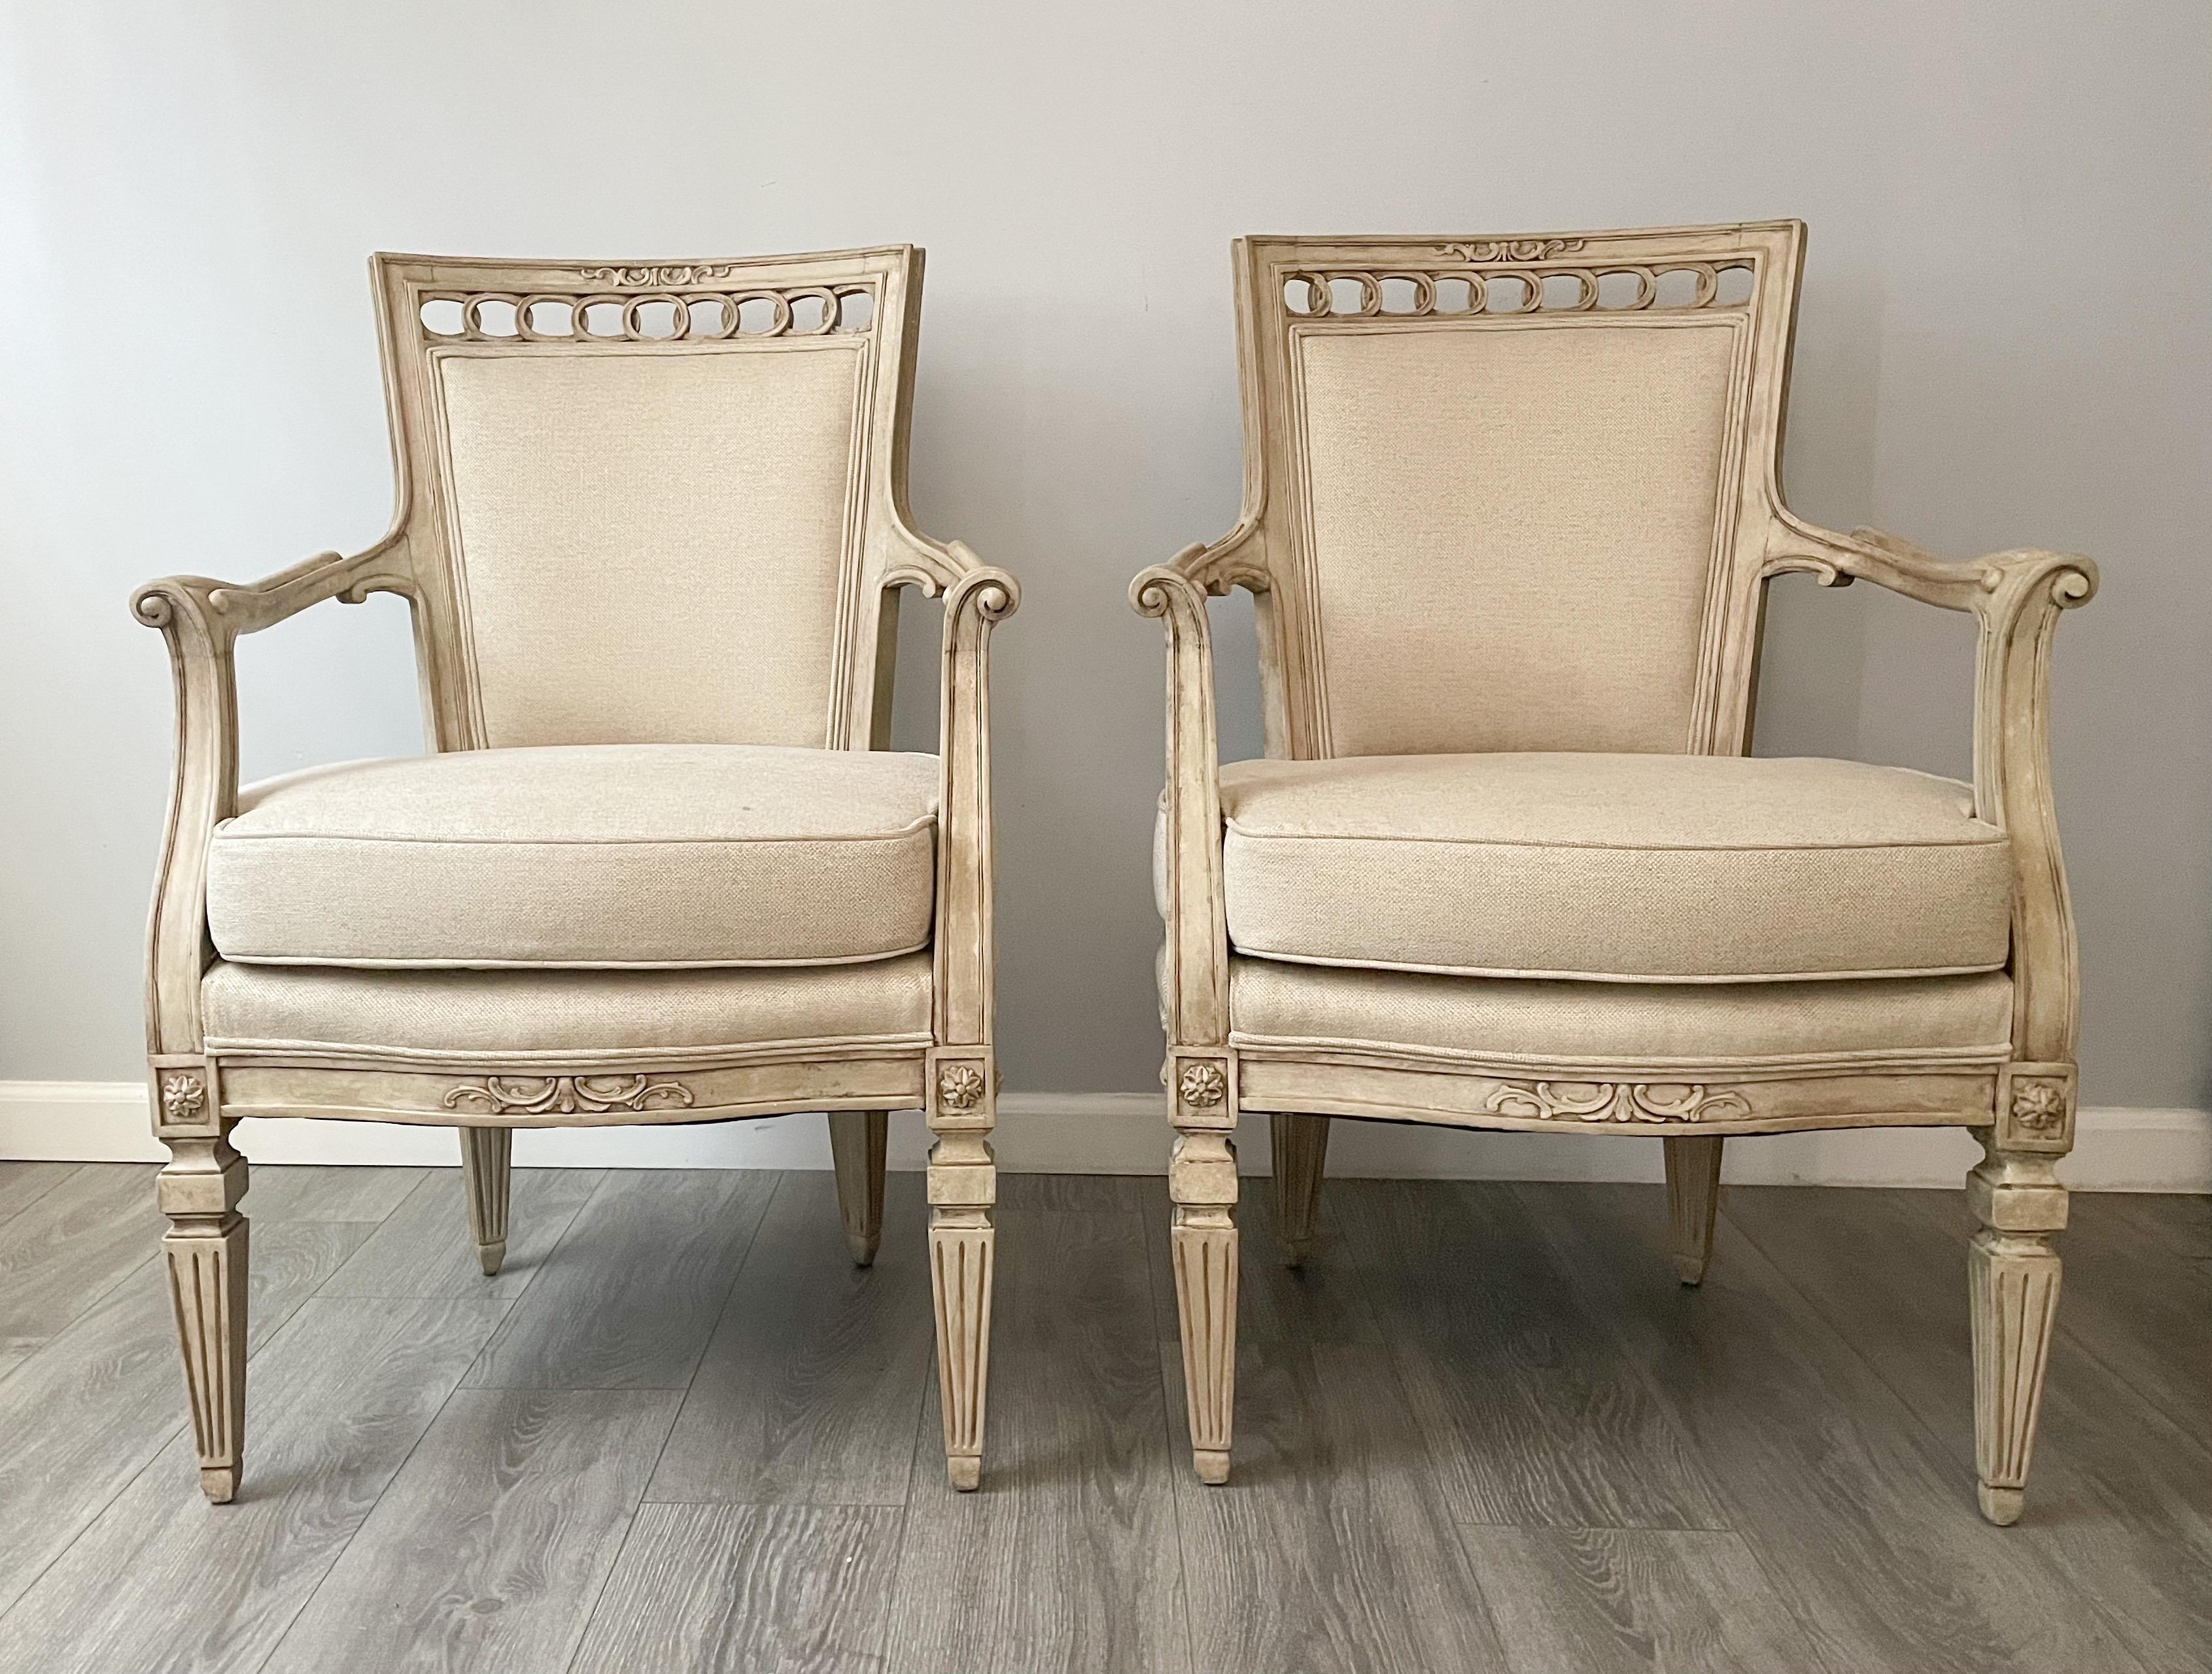 Gorgeous, antique pair of French arm chairs in the neoclassical style.

Each chair consists of an elegantly carved wood frame with a distressed paint finish and new linen upholstery. Loose seat cushions and self-welt details. 

The chairs are